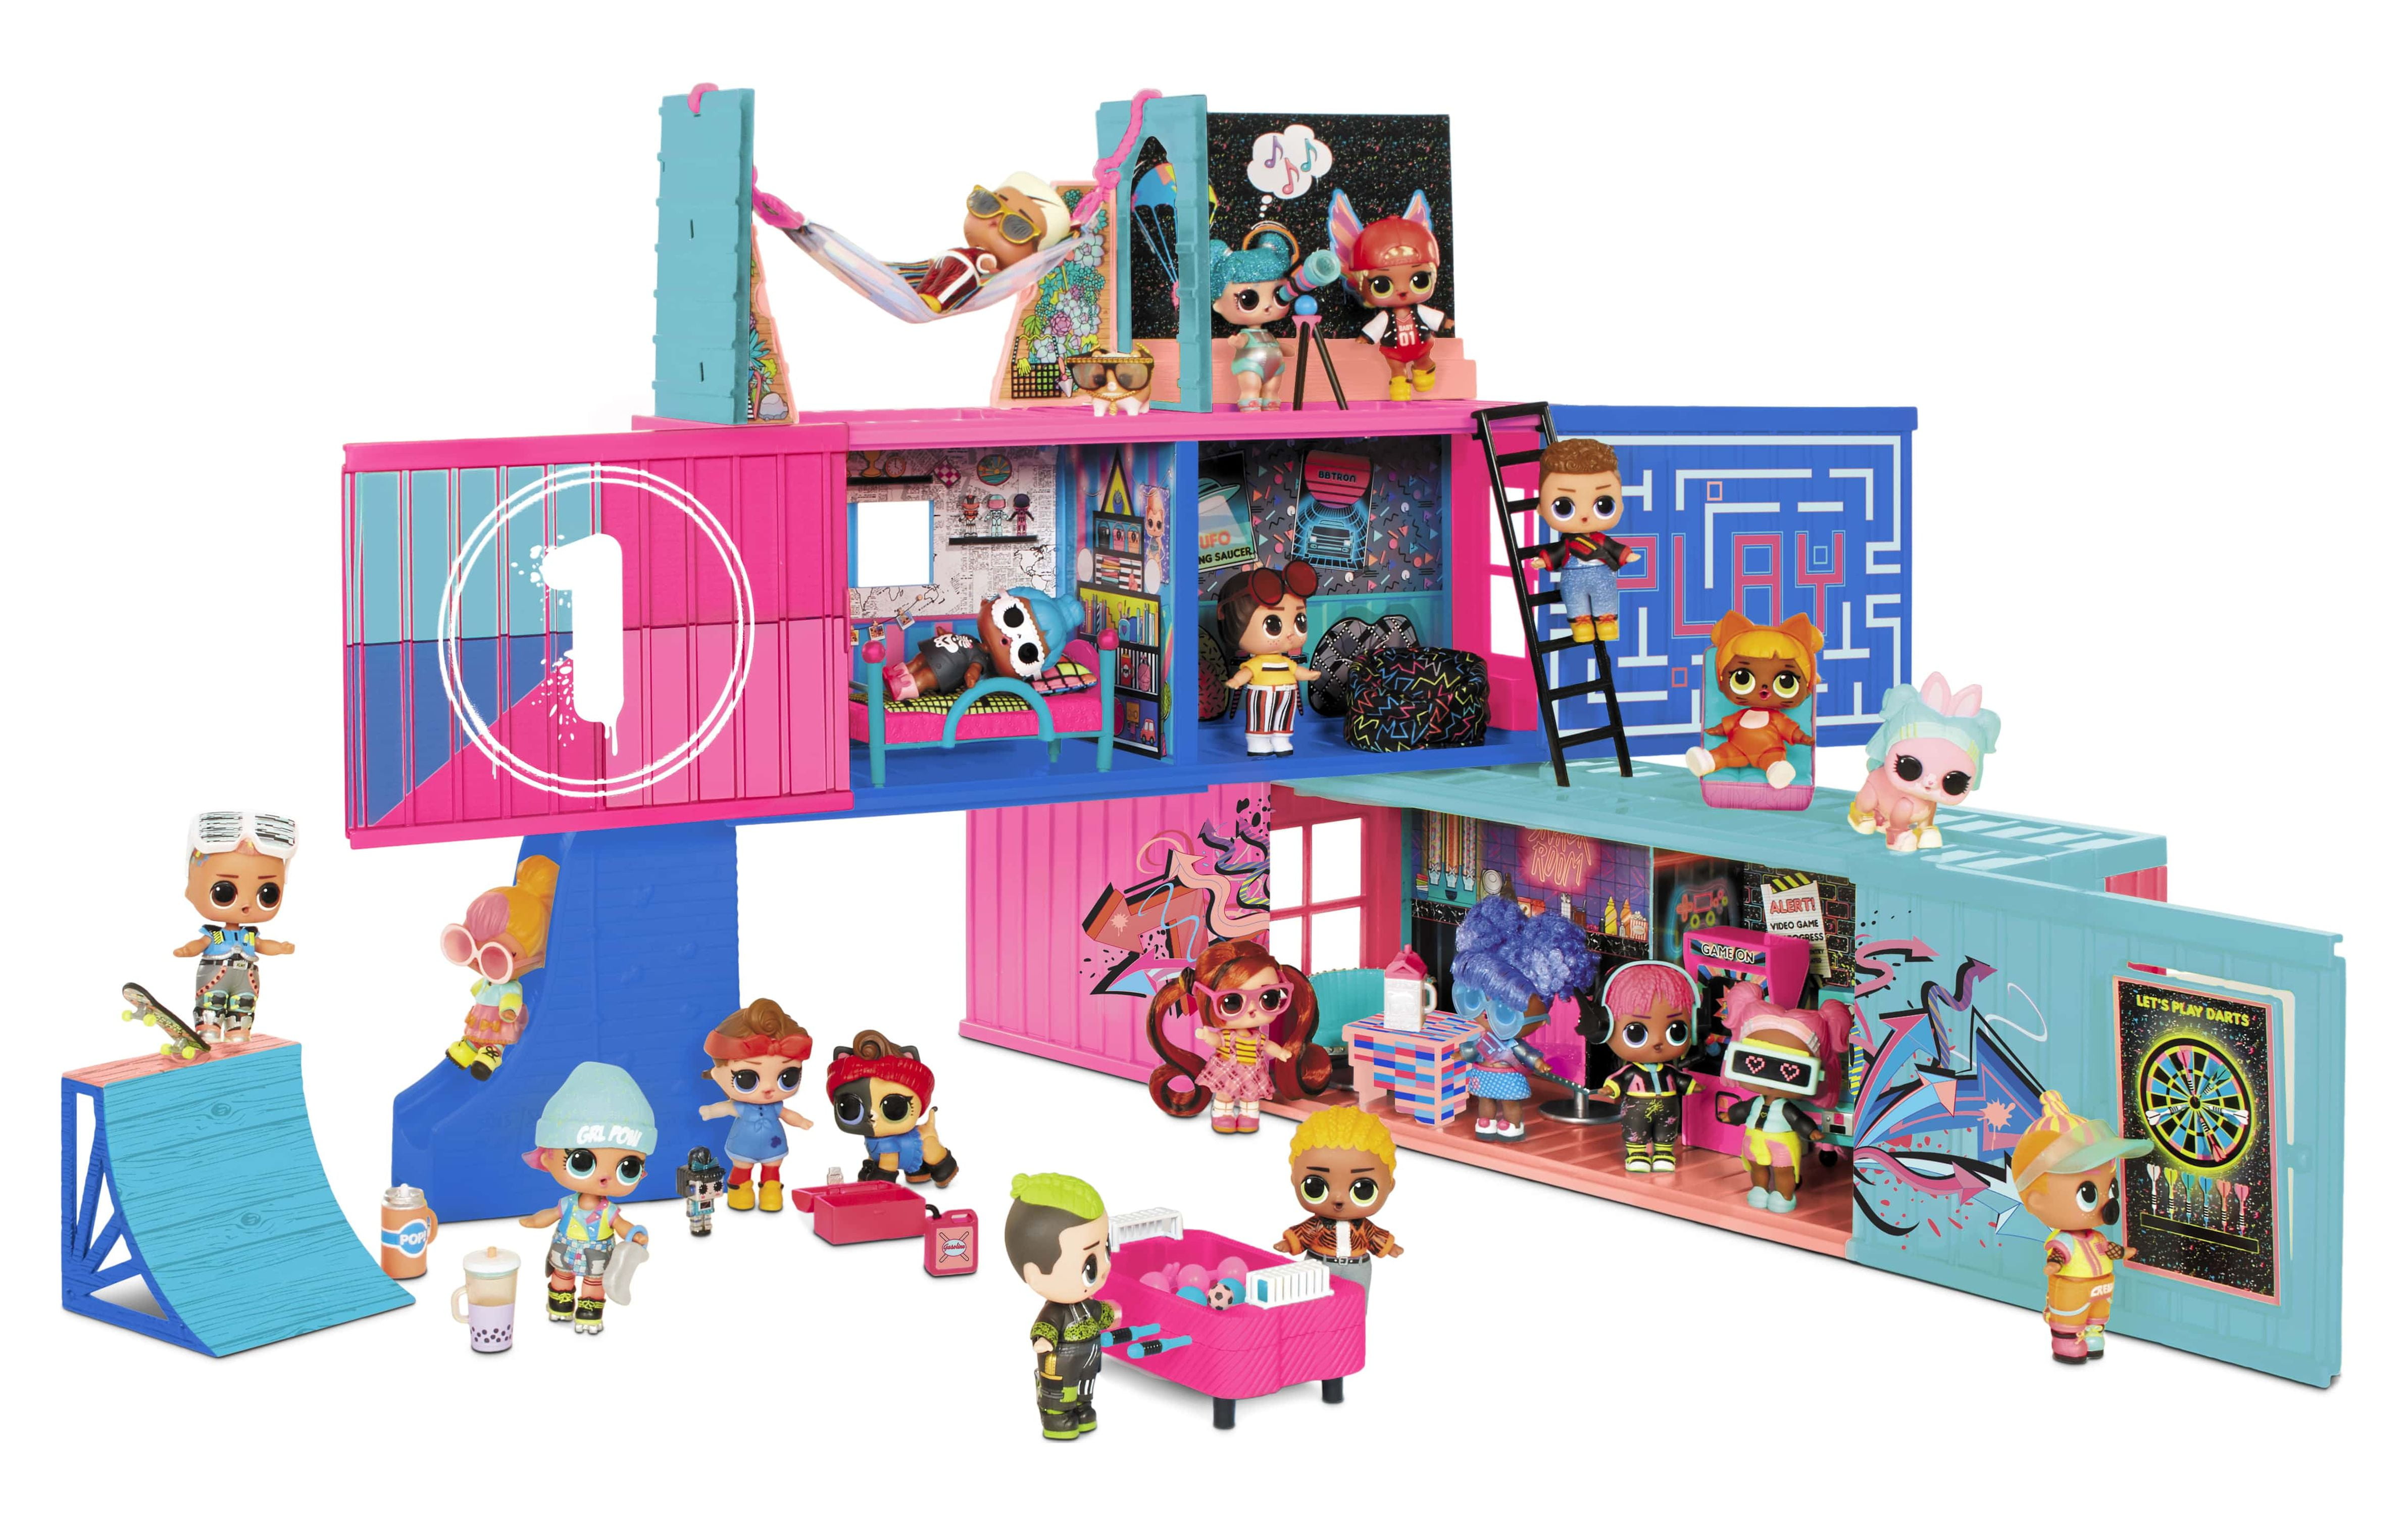  Imagination Gaming LOL Surprise Peek-A-Boo Runway Game, Secret  Doll Reveals on Adorable Pink Runway, Includes Bonus Ruckus Game & Digital  Party Game, Ages 5+ : Toys & Games